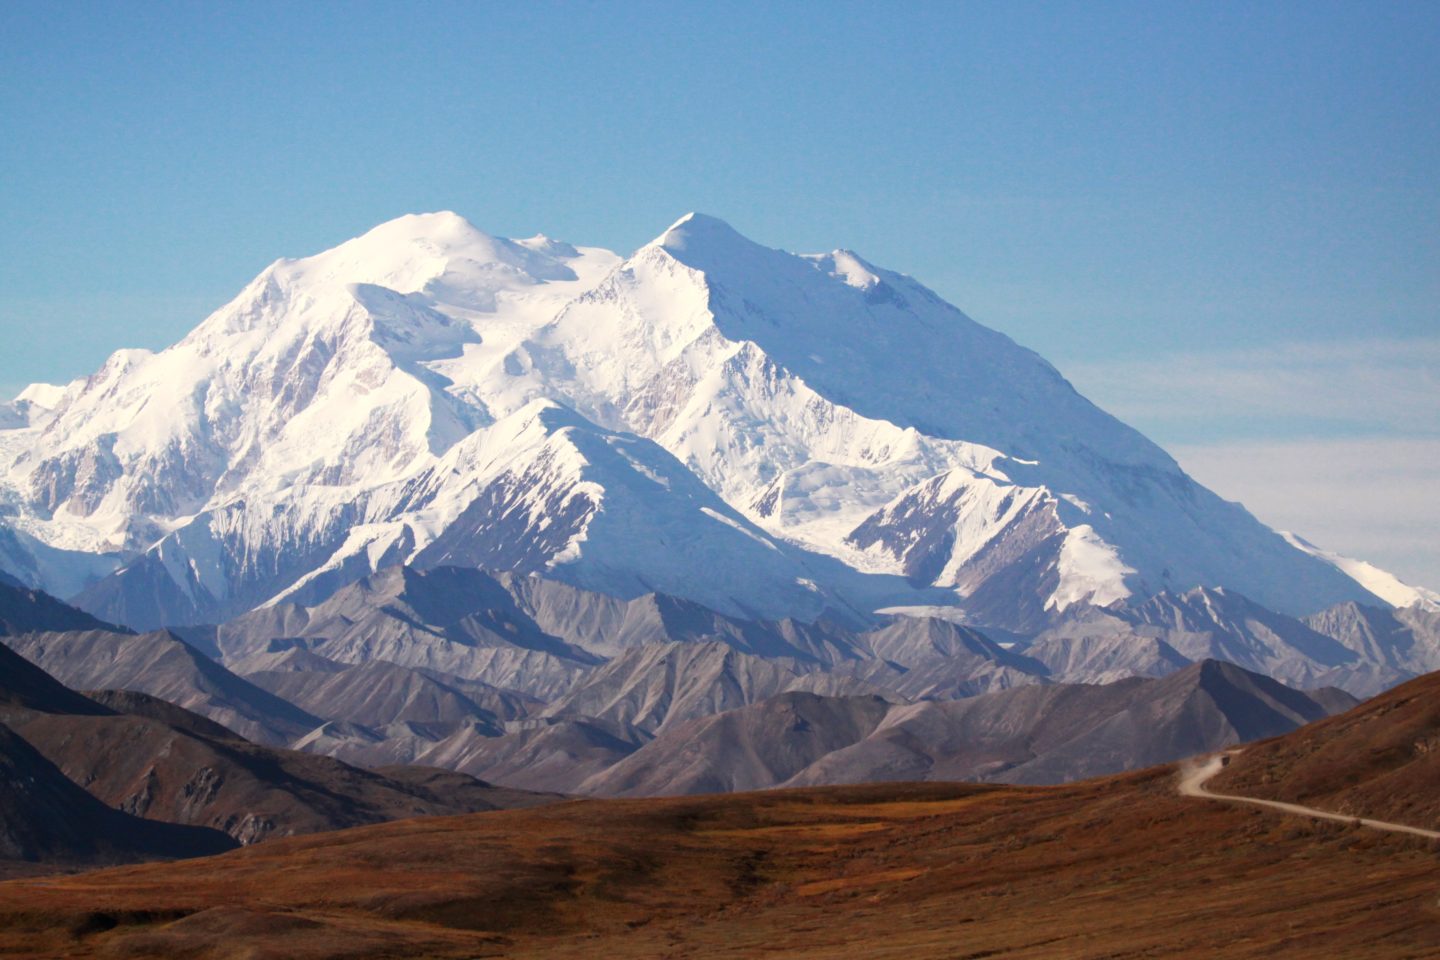 Mount Denali, the tallest mountain in the world and the highest peak in the Americas